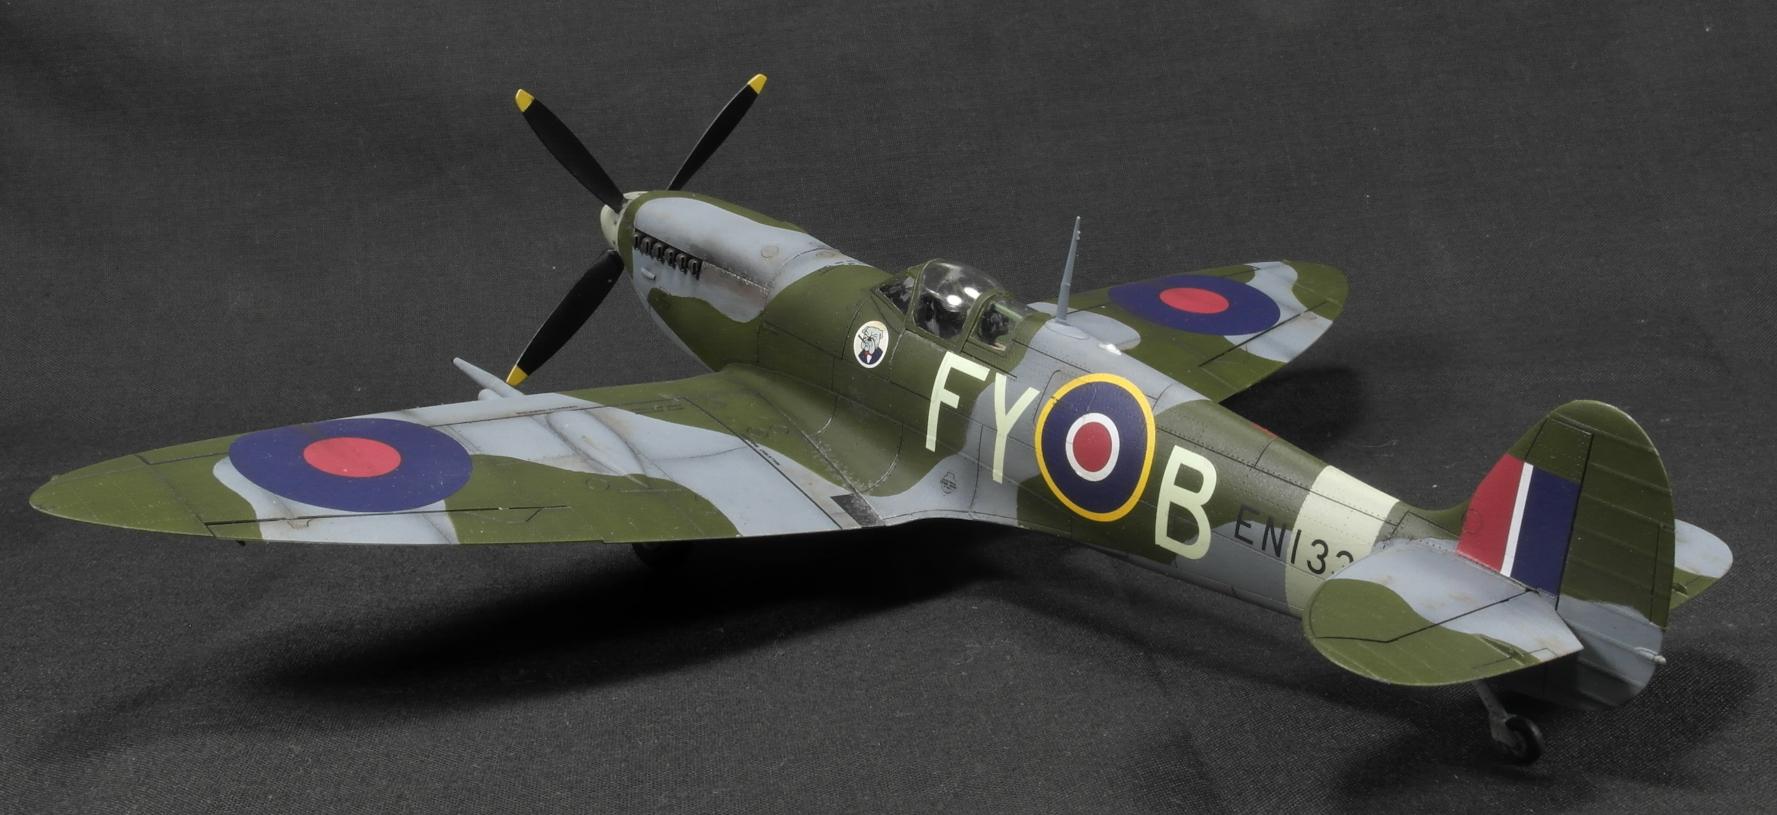 1:48 Scale, Aircraft, Historical, Scale Modelling